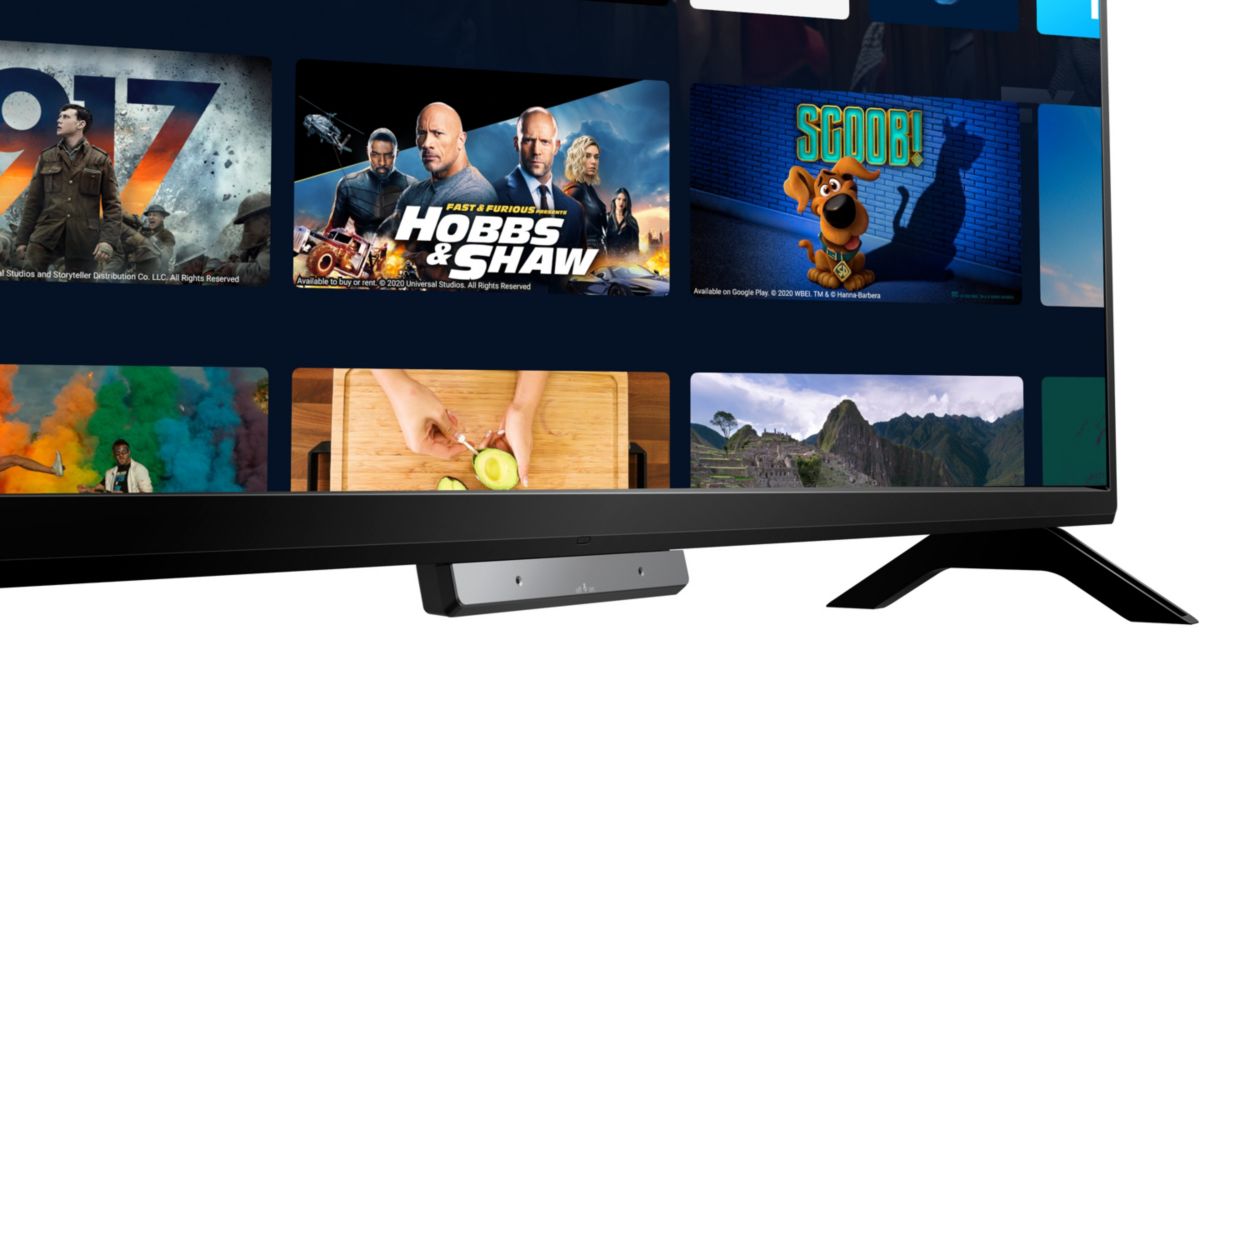 Philips 50 Class 4K Ultra HD (2160p) Android Smart TV with Handsfree  Google Built-in (50PFL5806/F7) 